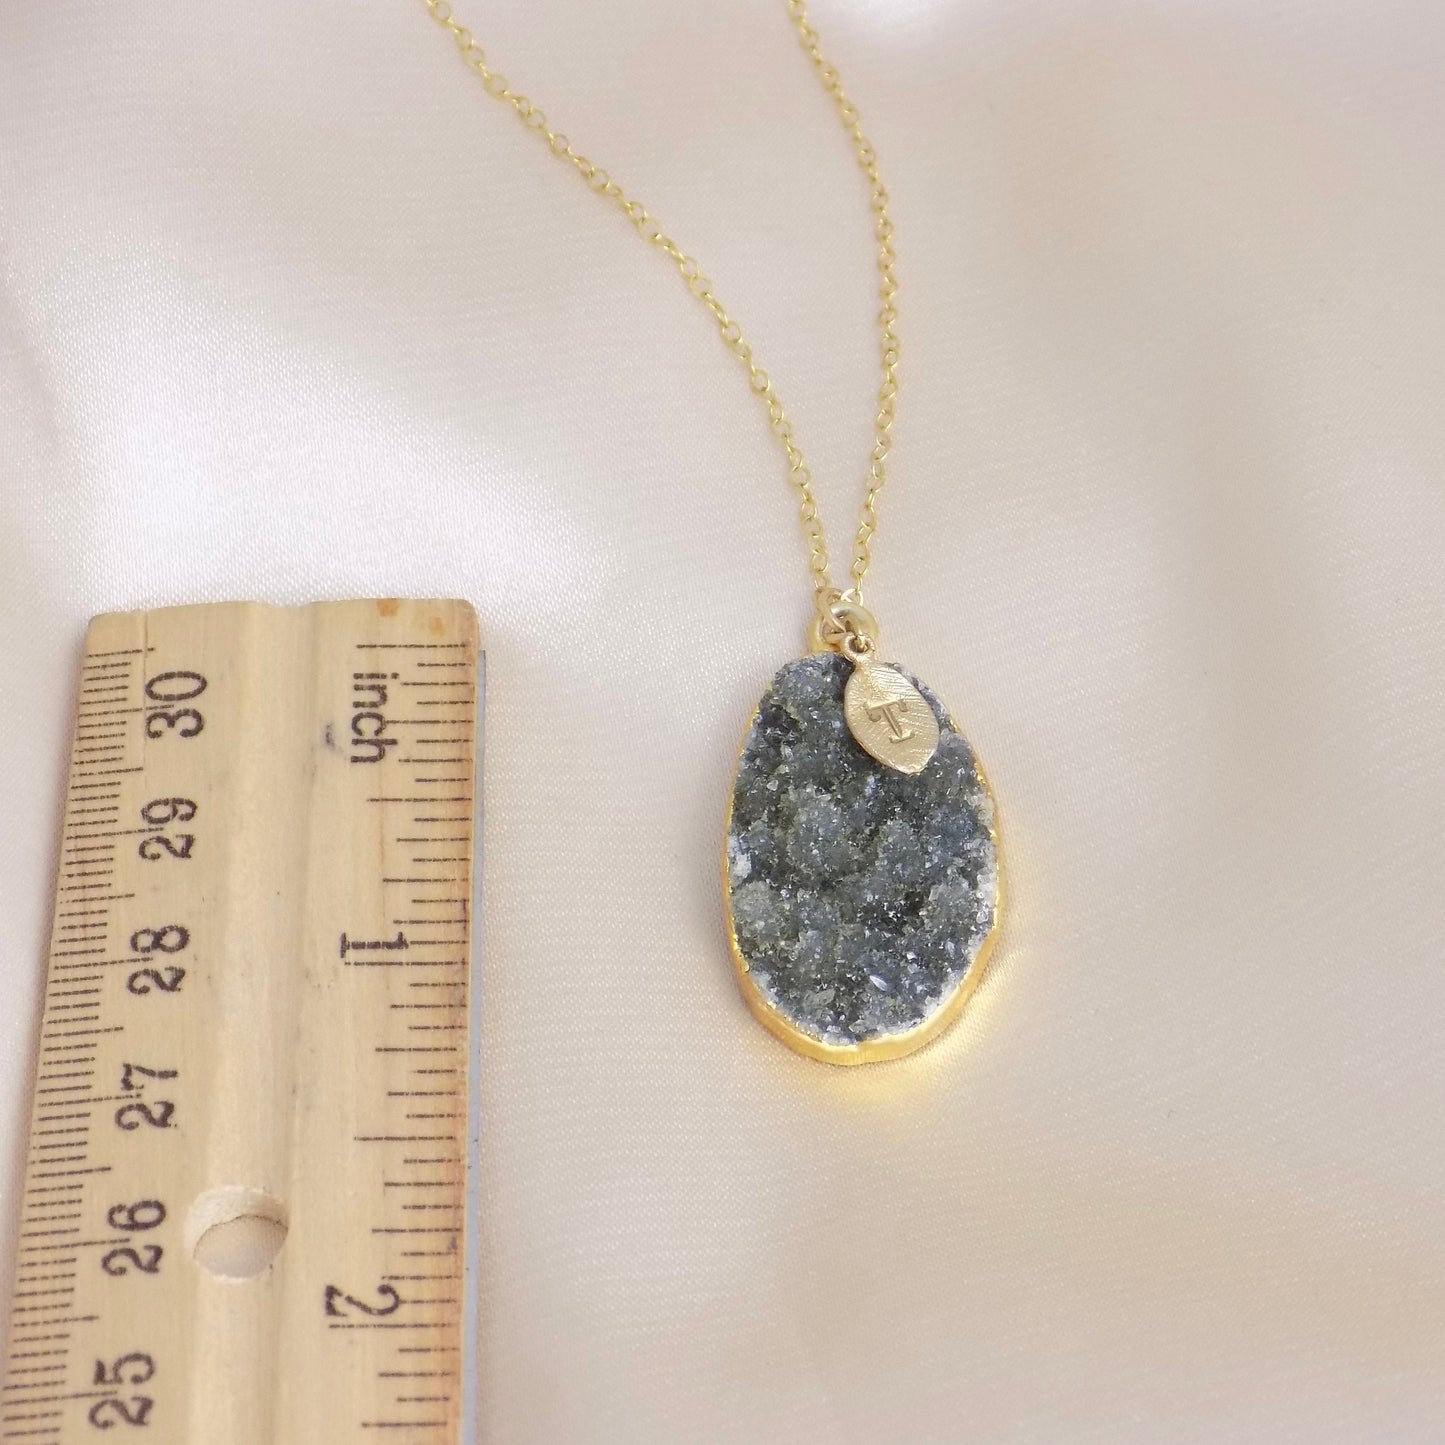 Personalized Natural Druzy Necklace Gold, Dark Gray Crystal Pendant, Christmas Gift For Her, G13-503